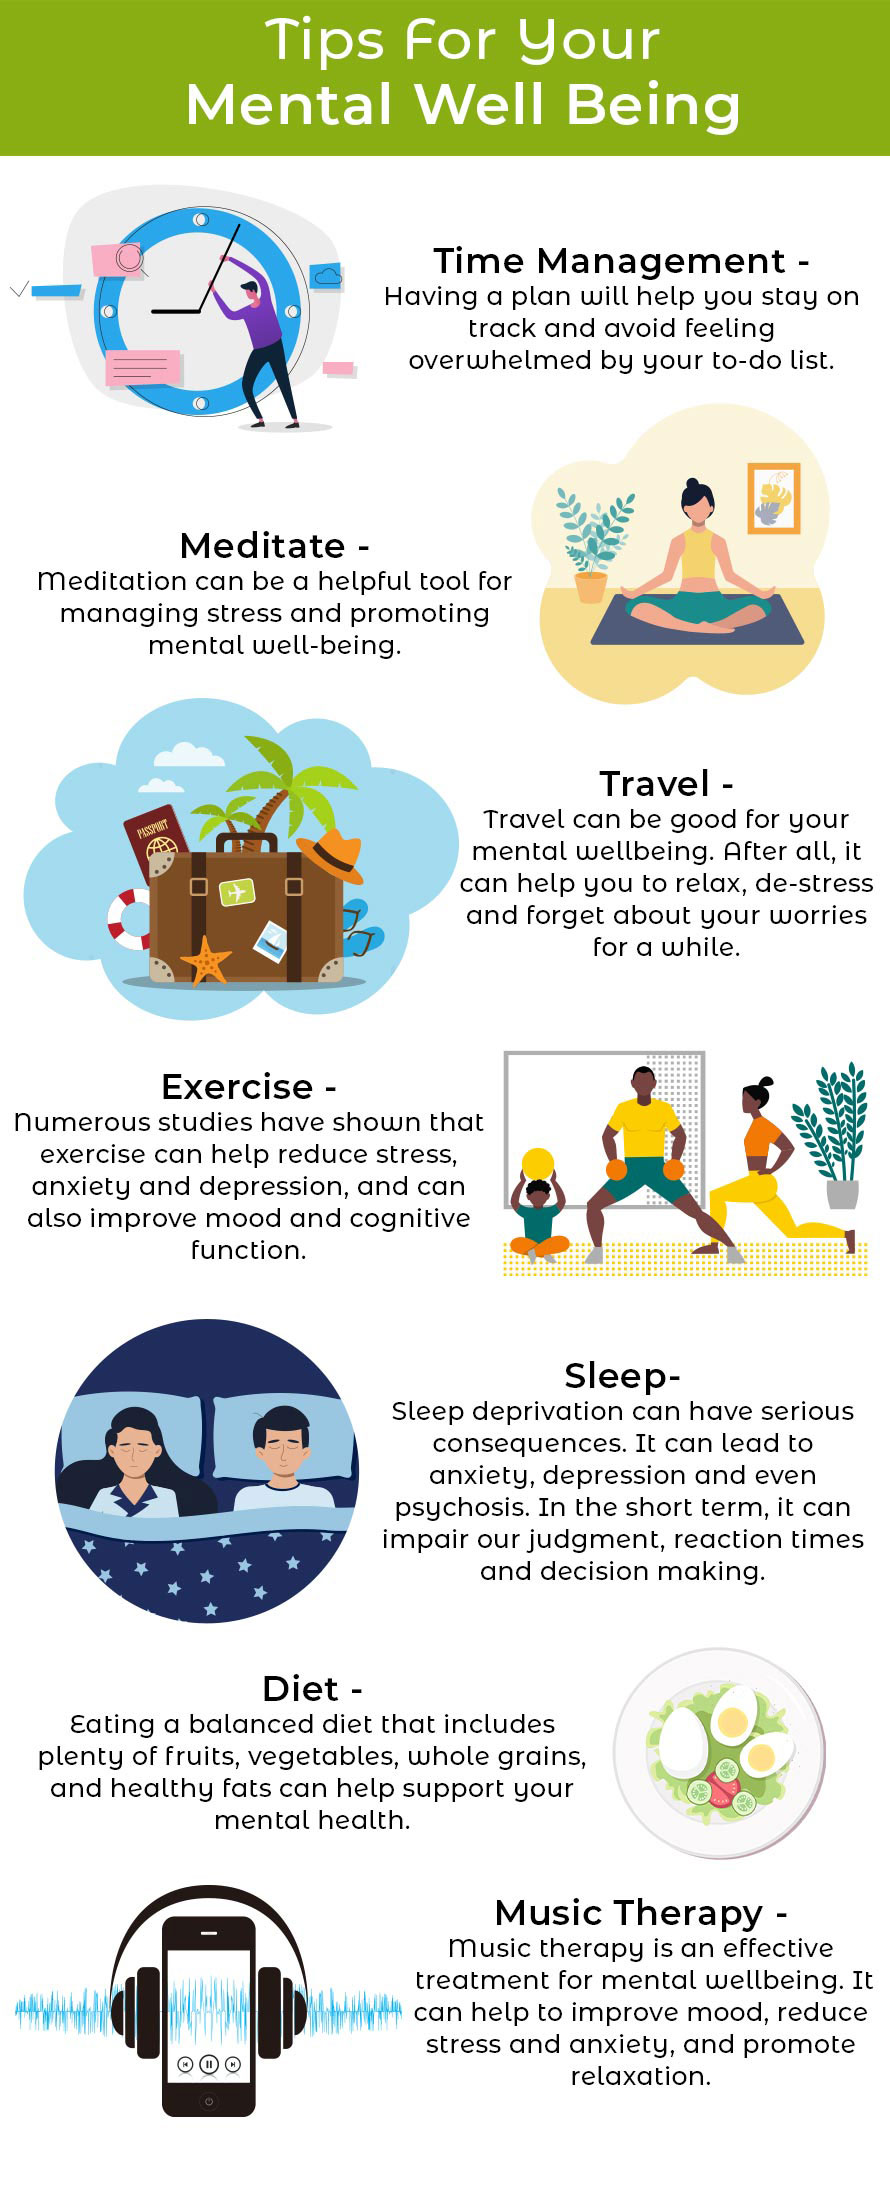 Tips For Your Mental Well-Being